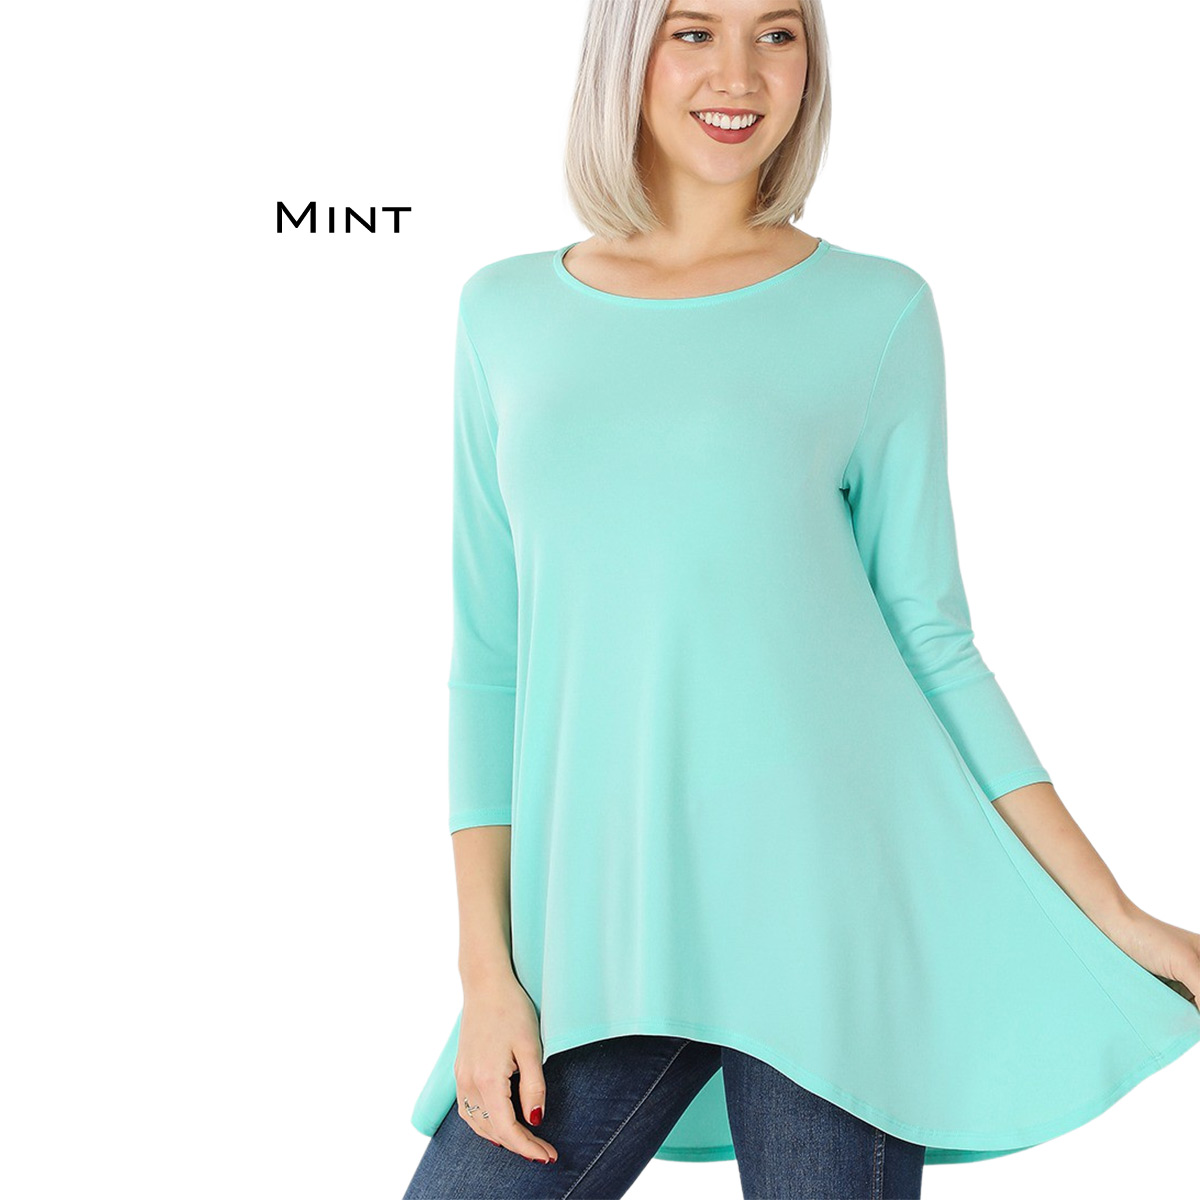 2367 - Ity High-Low 3/4 Sleeve Top MINT High-Low 3/4 Sleeve Top 2367 - Large